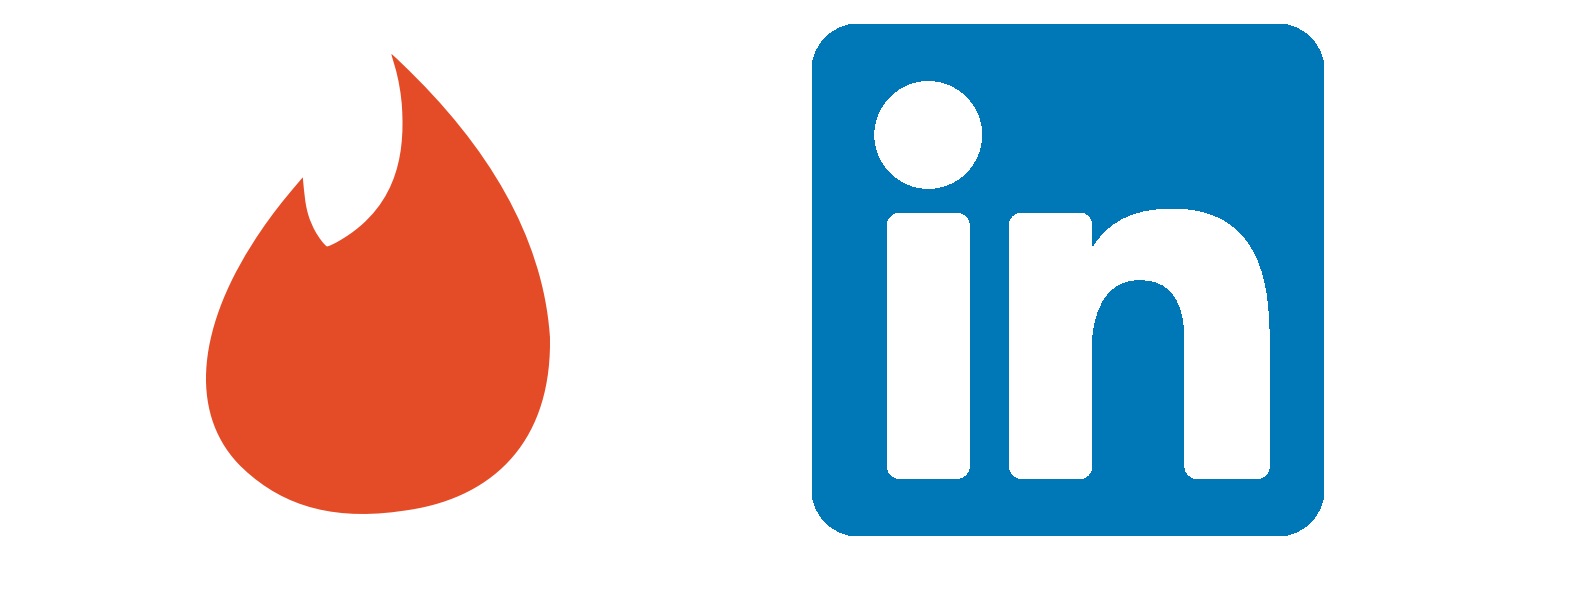 How Tinder Can Help You Succeed On LinkedIn (No Not That Like)